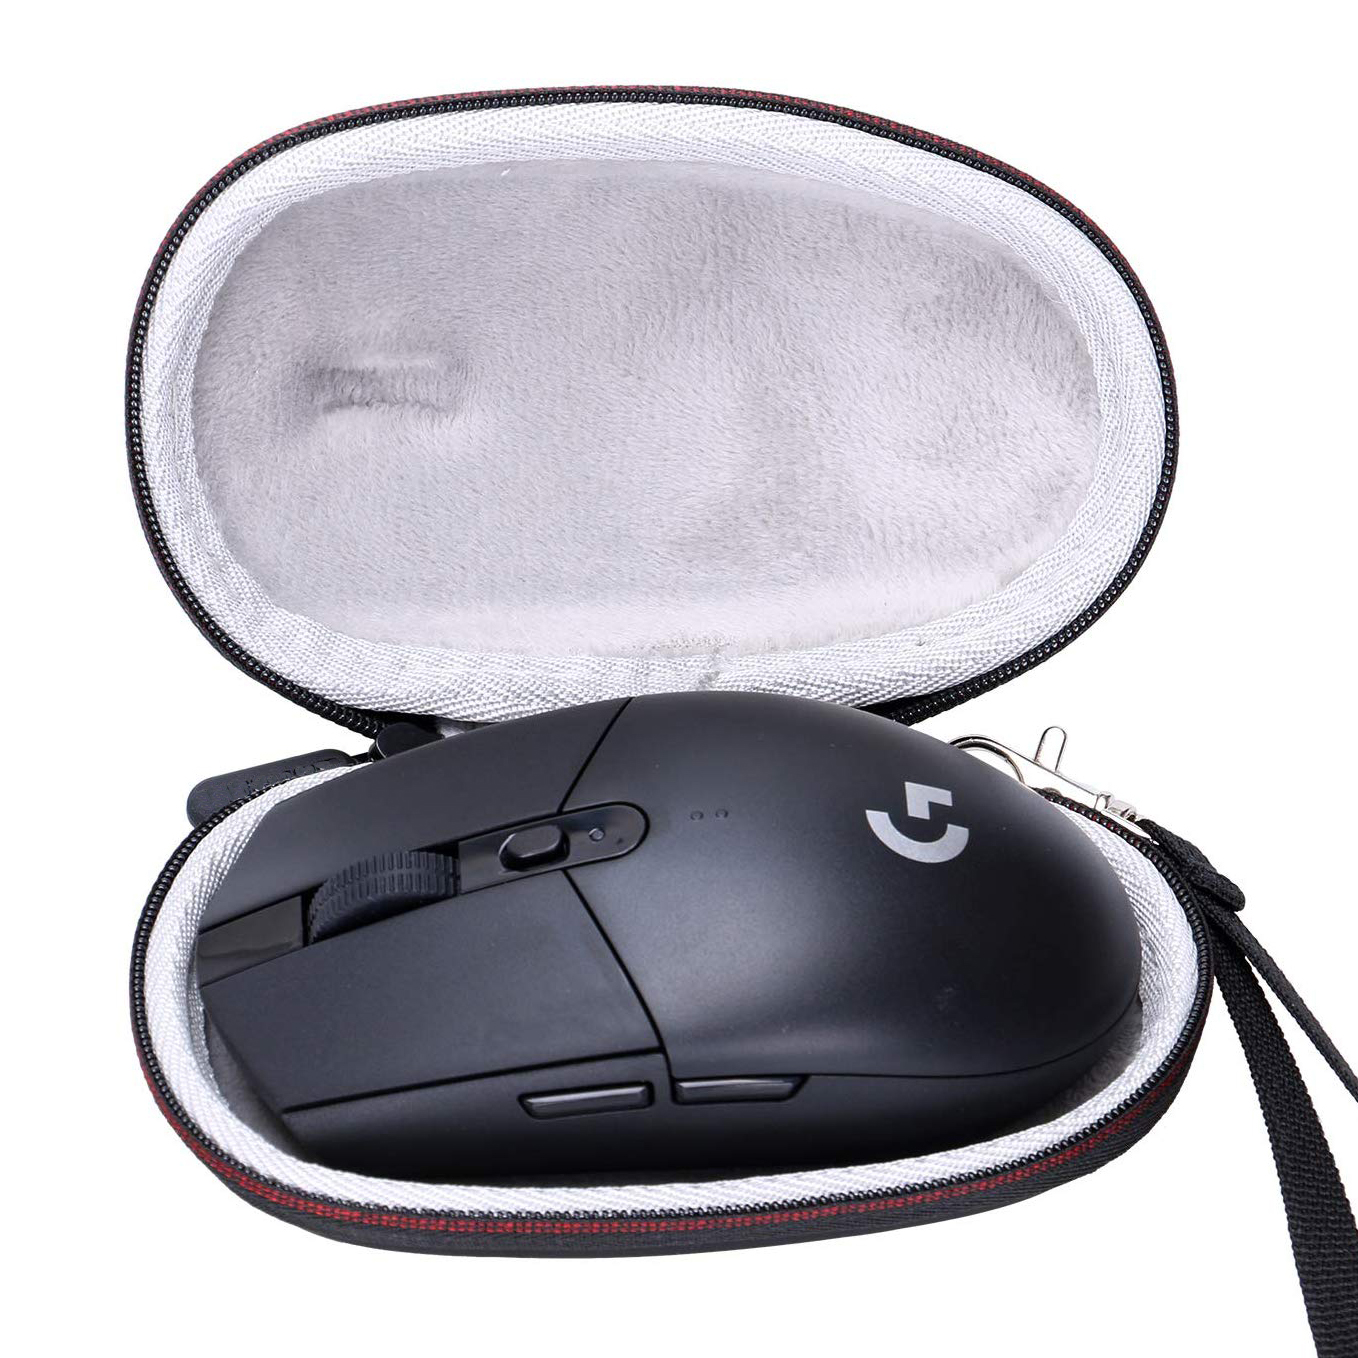 Wholesale Thermoformed Eva Hard Travel Mouse Case Foar Carrying Game Computer Mouse